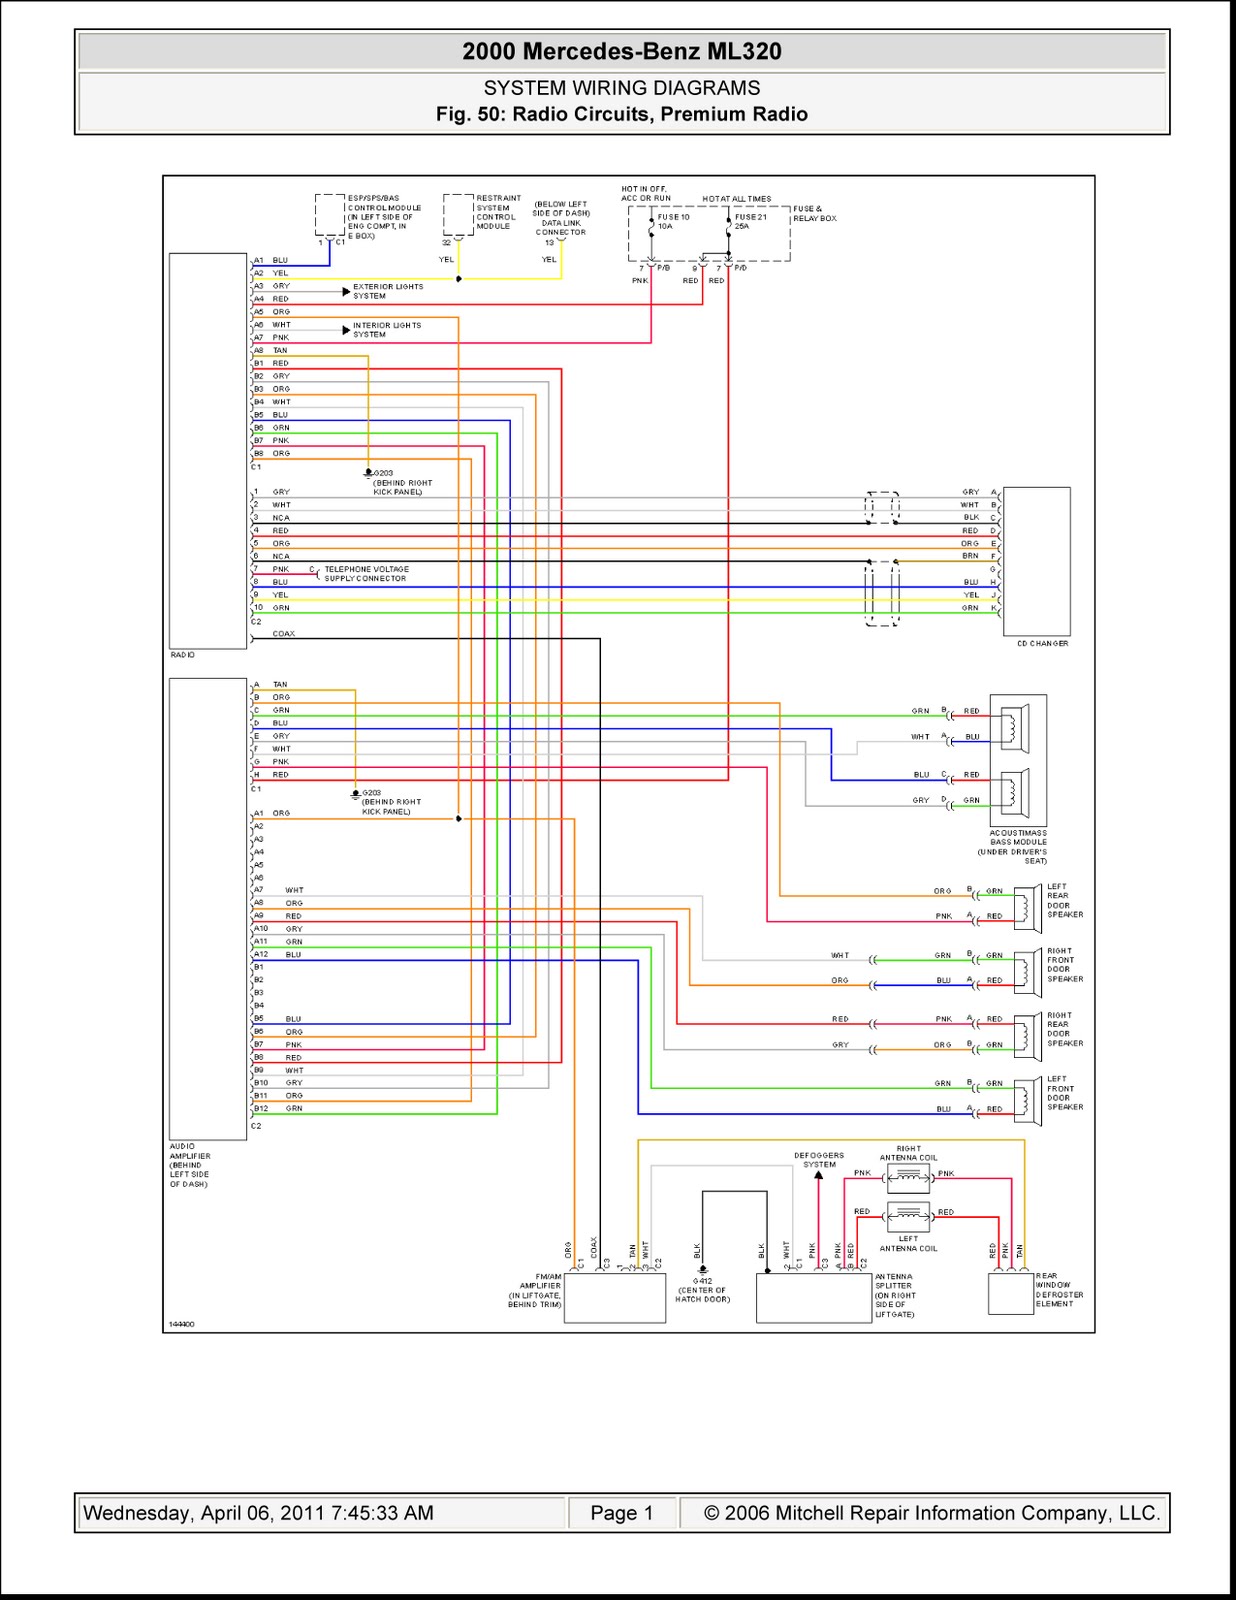 May 2011 | Schematic Wiring Diagrams Solutions